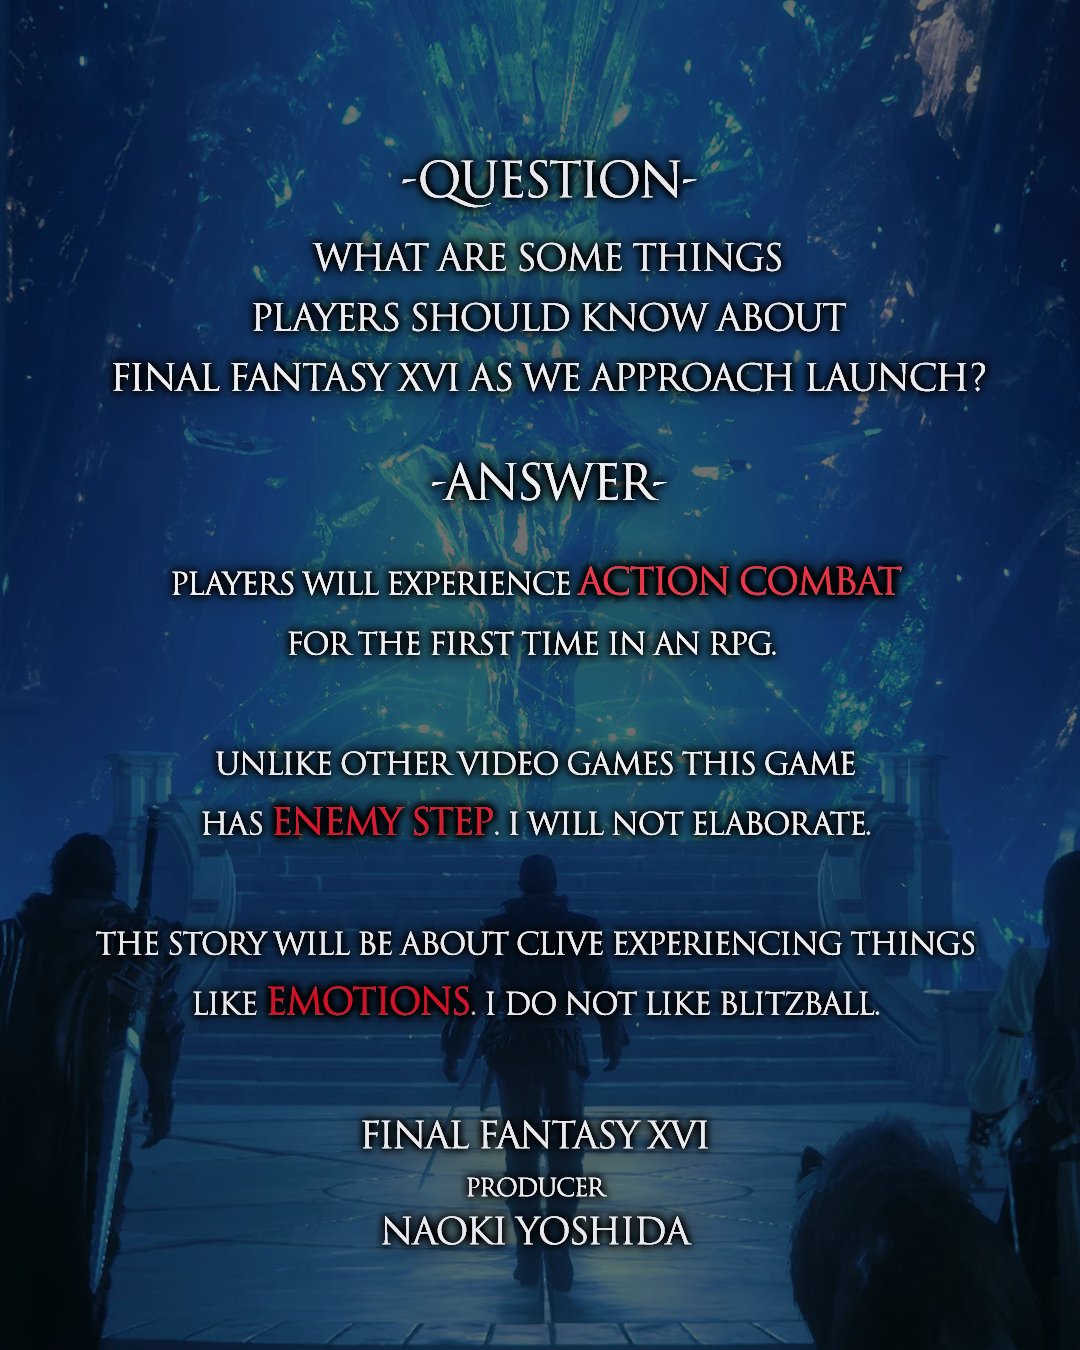 How long will Final Fantasy 16 be? Answered